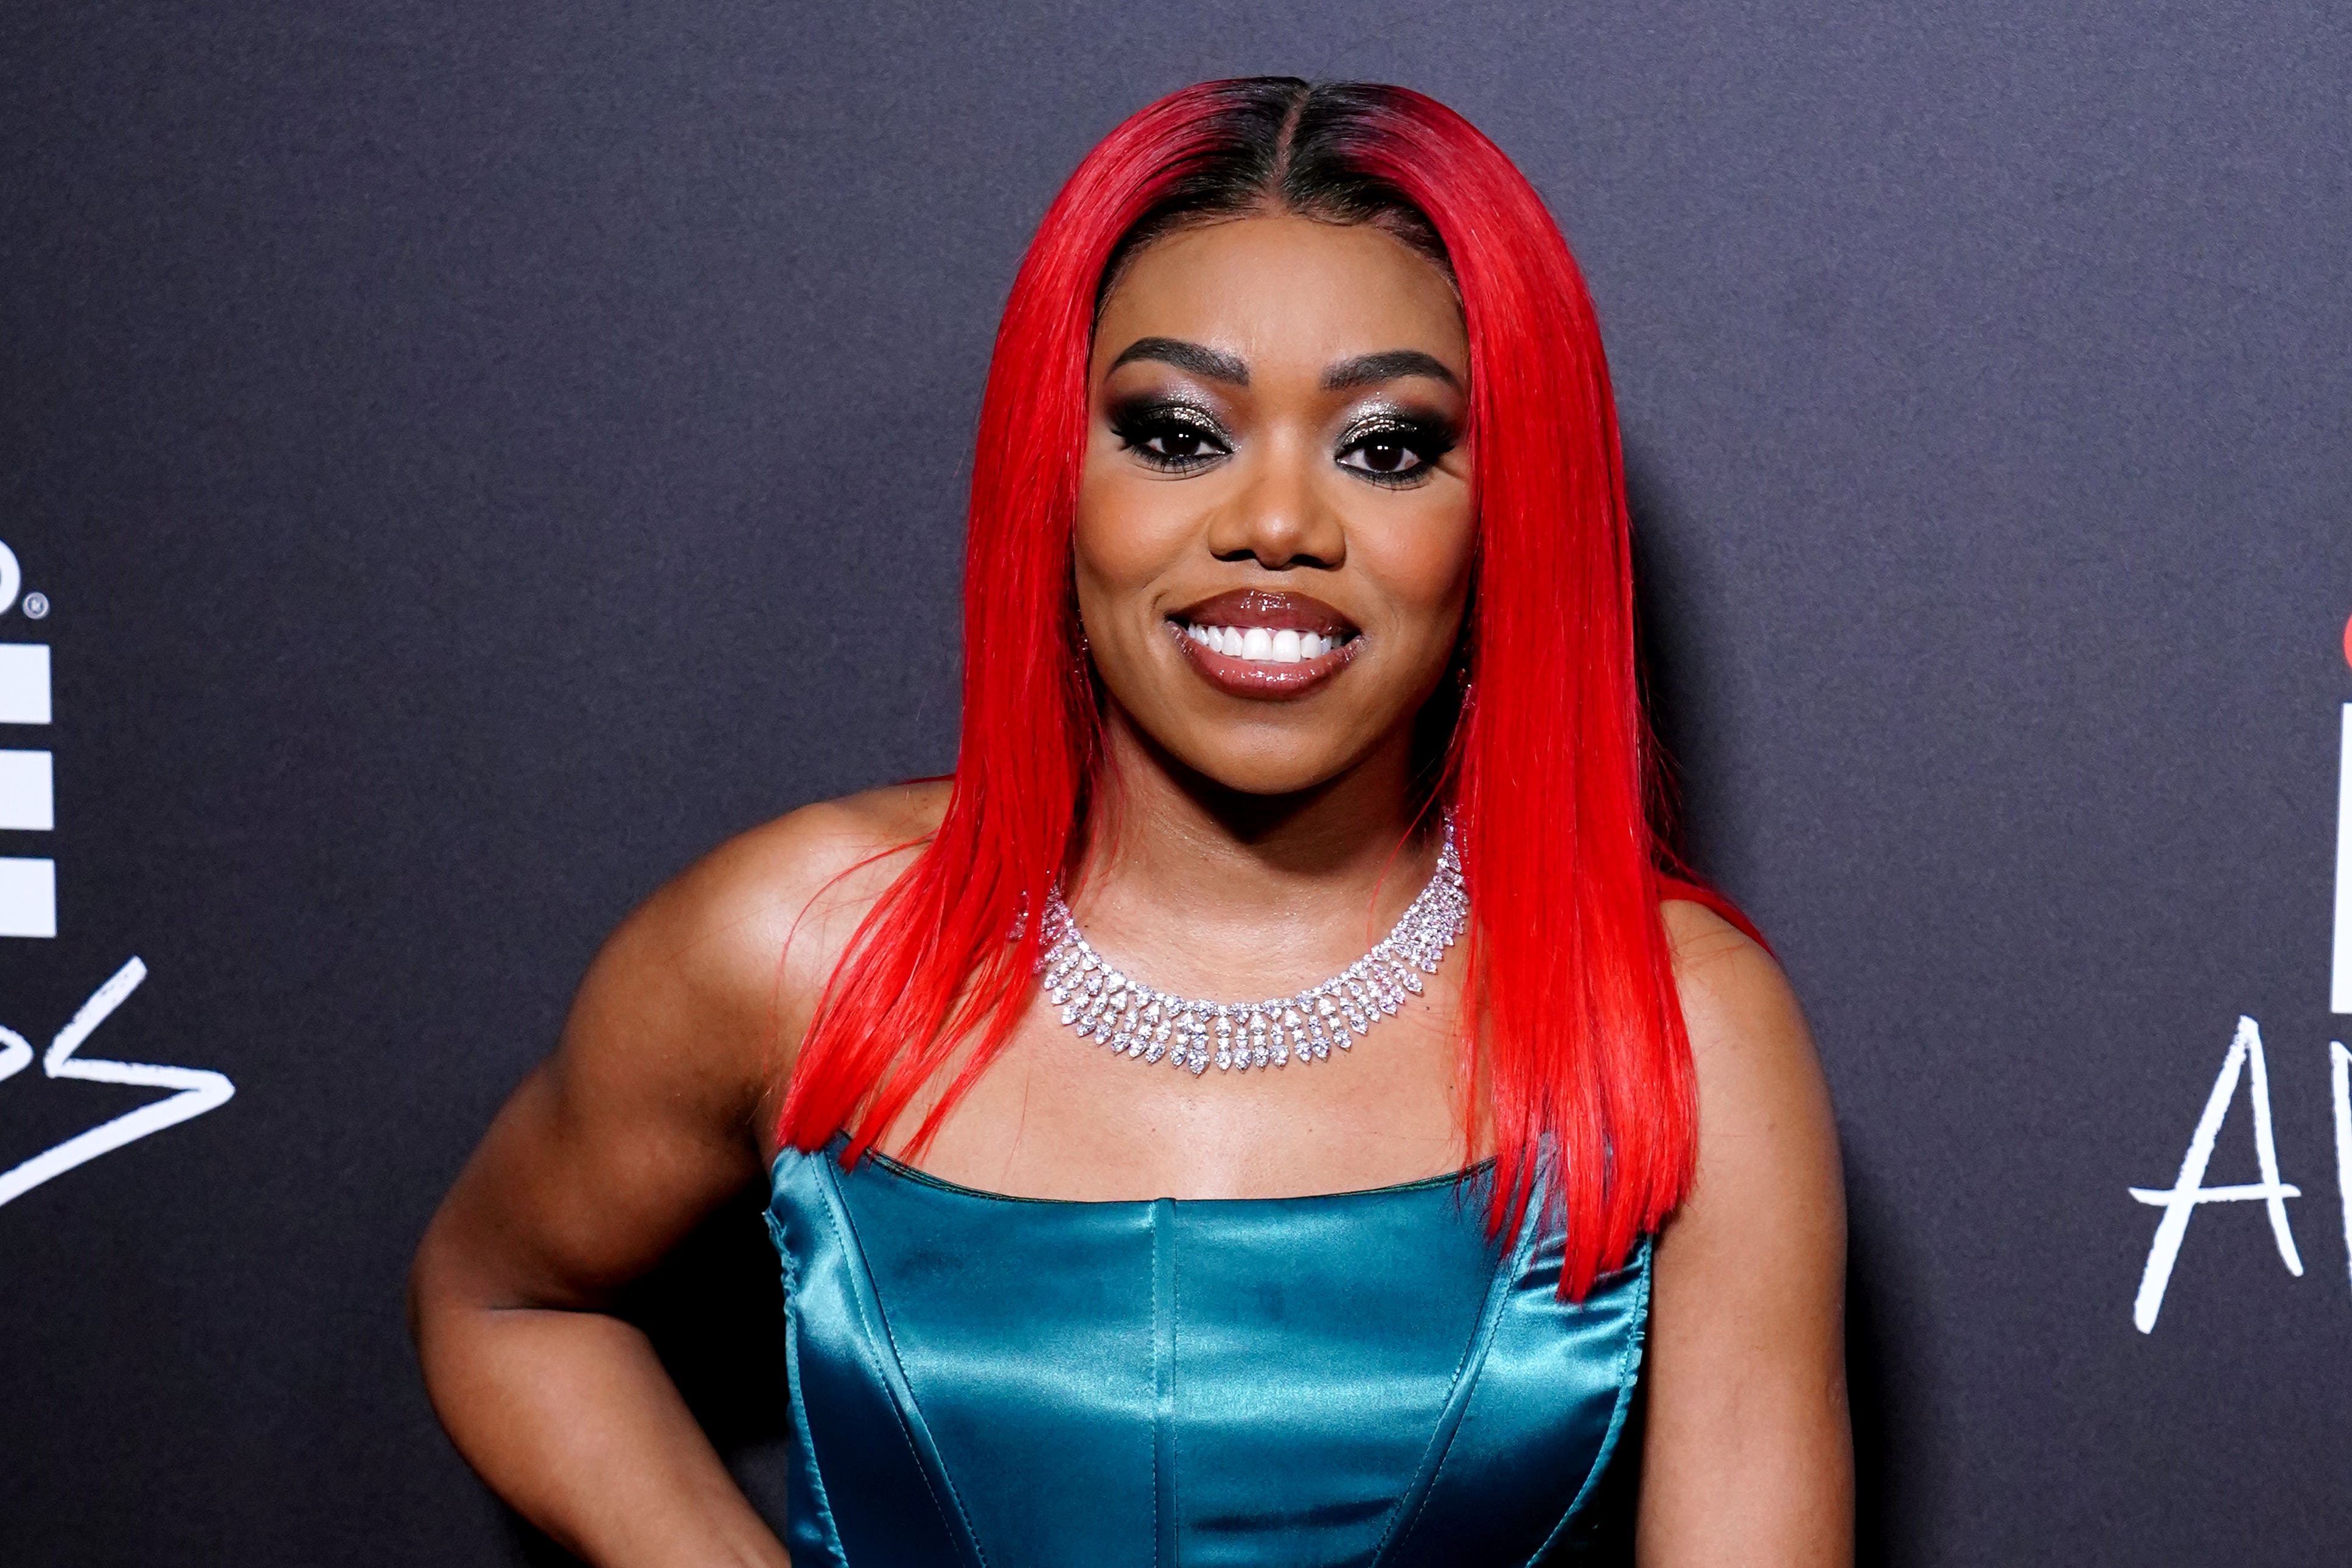 A jury at Snaresbrook Crown Court found Lady Leshurr not guilty of attacking her ex-girlfriend’s partner